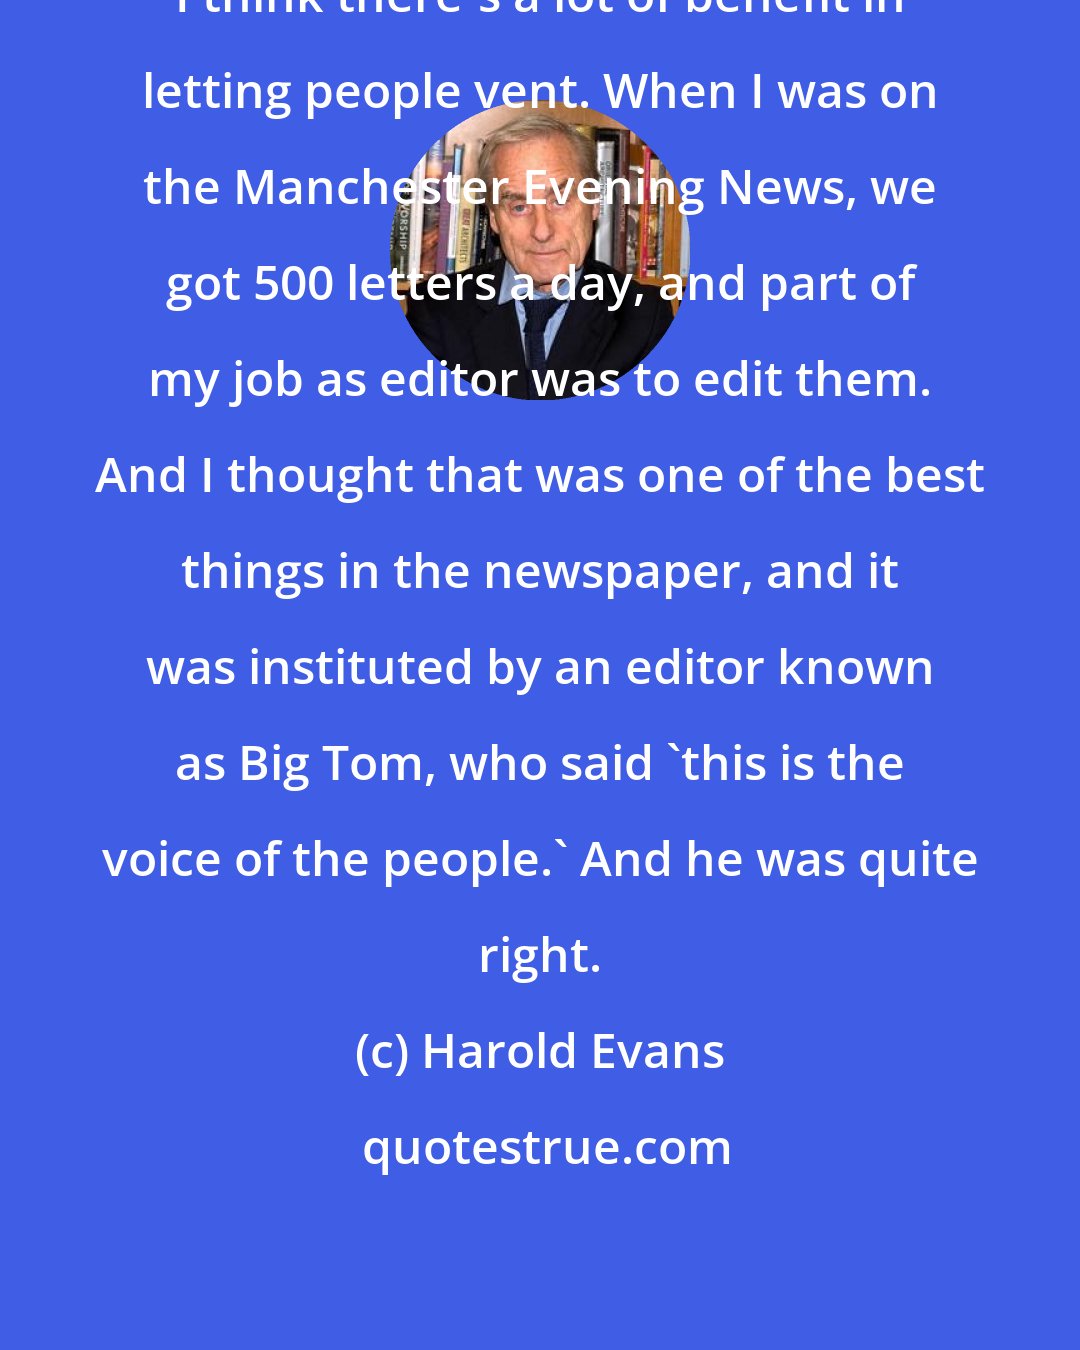 Harold Evans: I think there's a lot of benefit in letting people vent. When I was on the Manchester Evening News, we got 500 letters a day, and part of my job as editor was to edit them. And I thought that was one of the best things in the newspaper, and it was instituted by an editor known as Big Tom, who said 'this is the voice of the people.' And he was quite right.